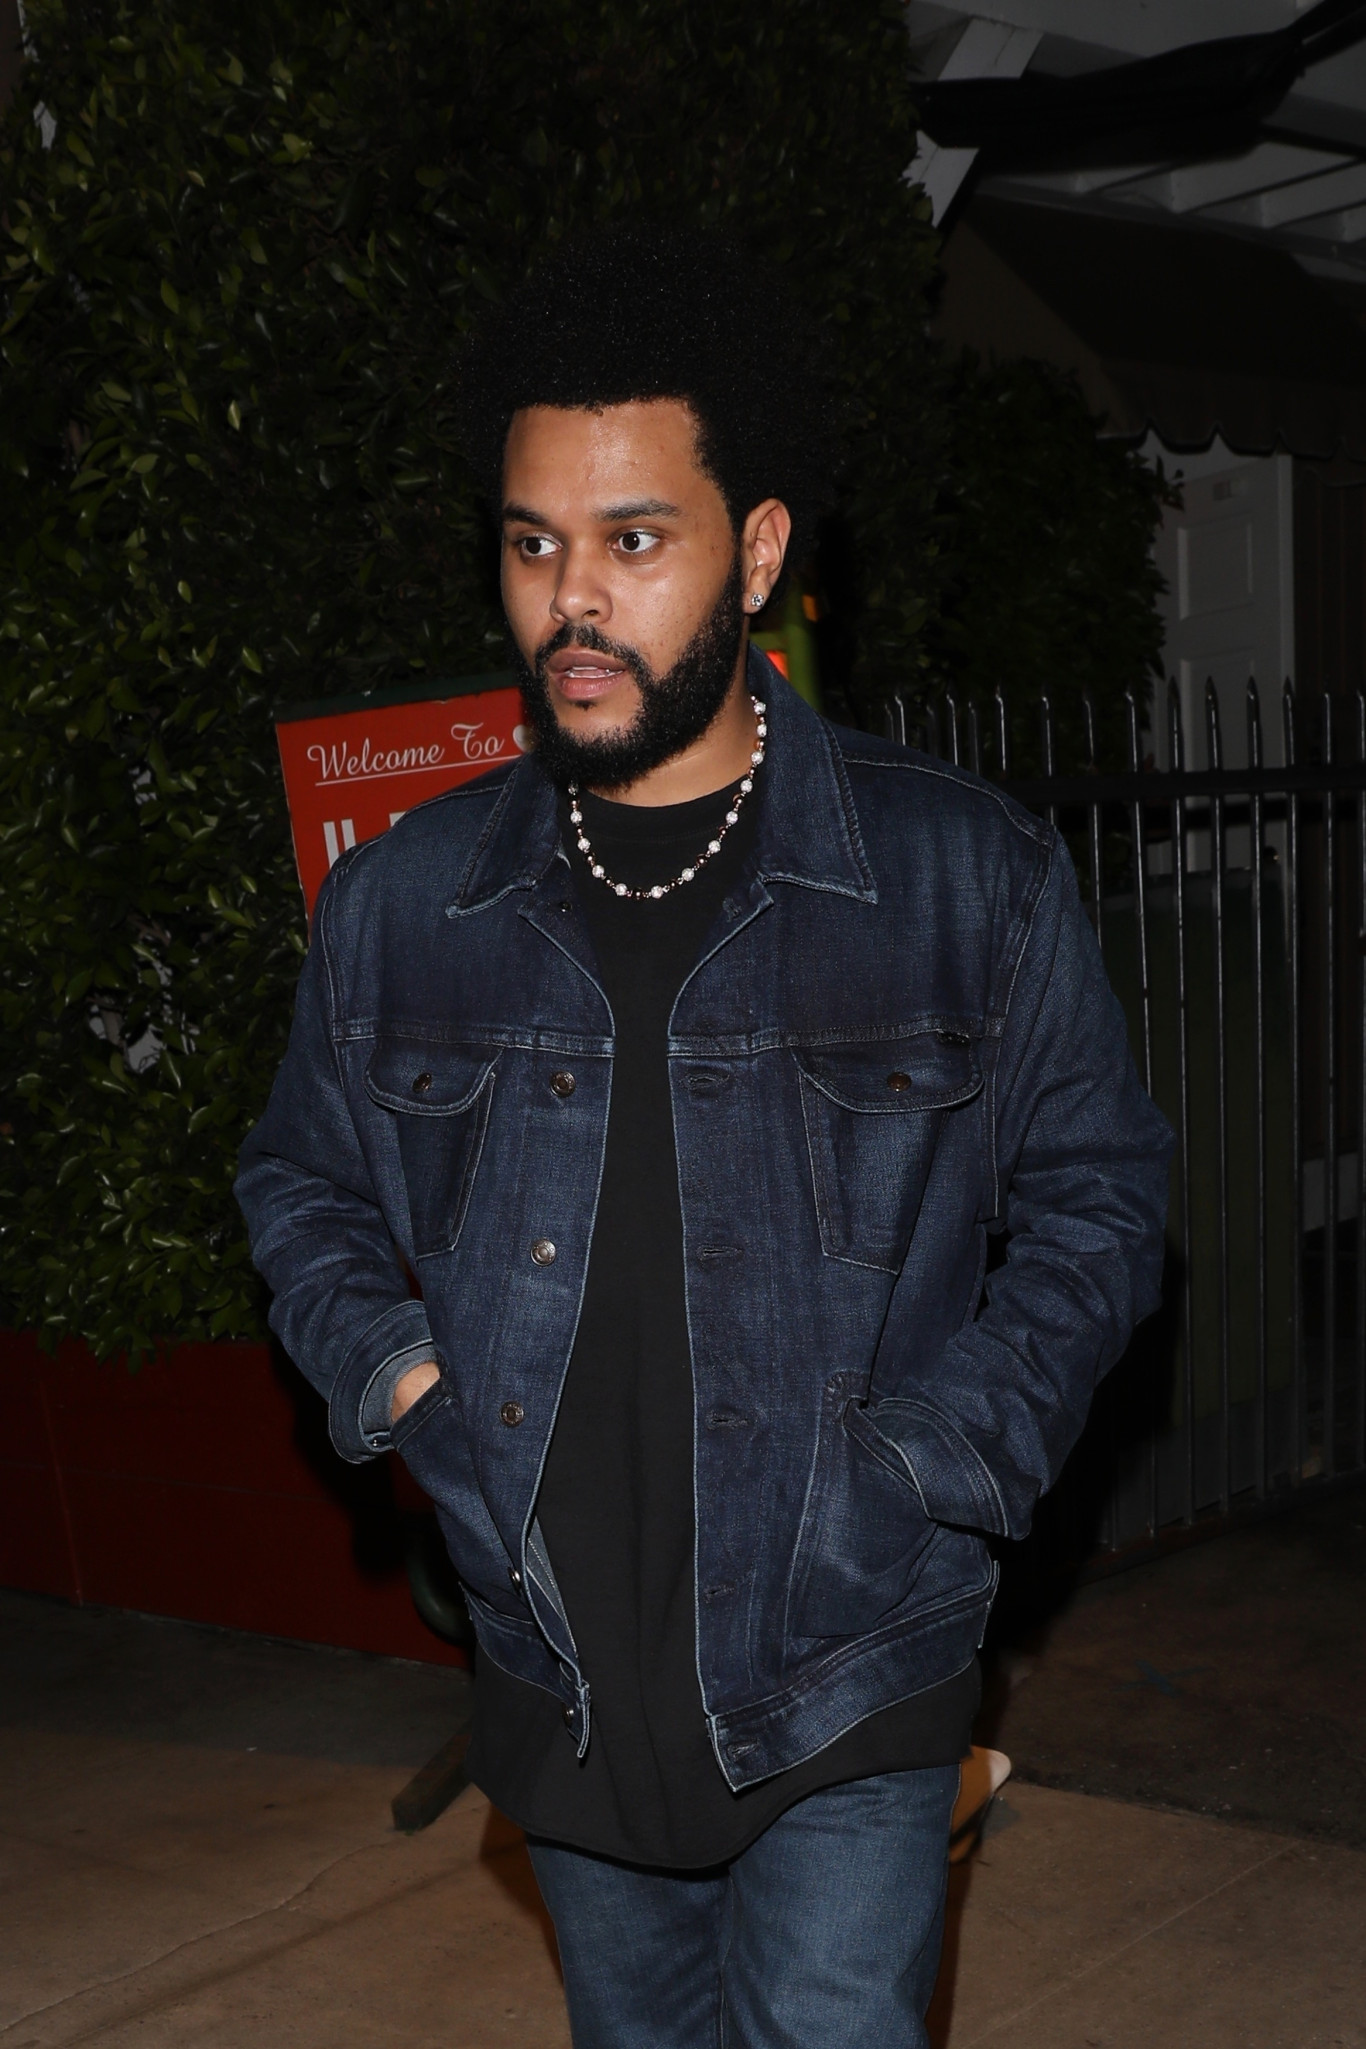 The Weeknd wore a denim look for his night out with Jolie. PHOTO CREDIT: BACKGRID